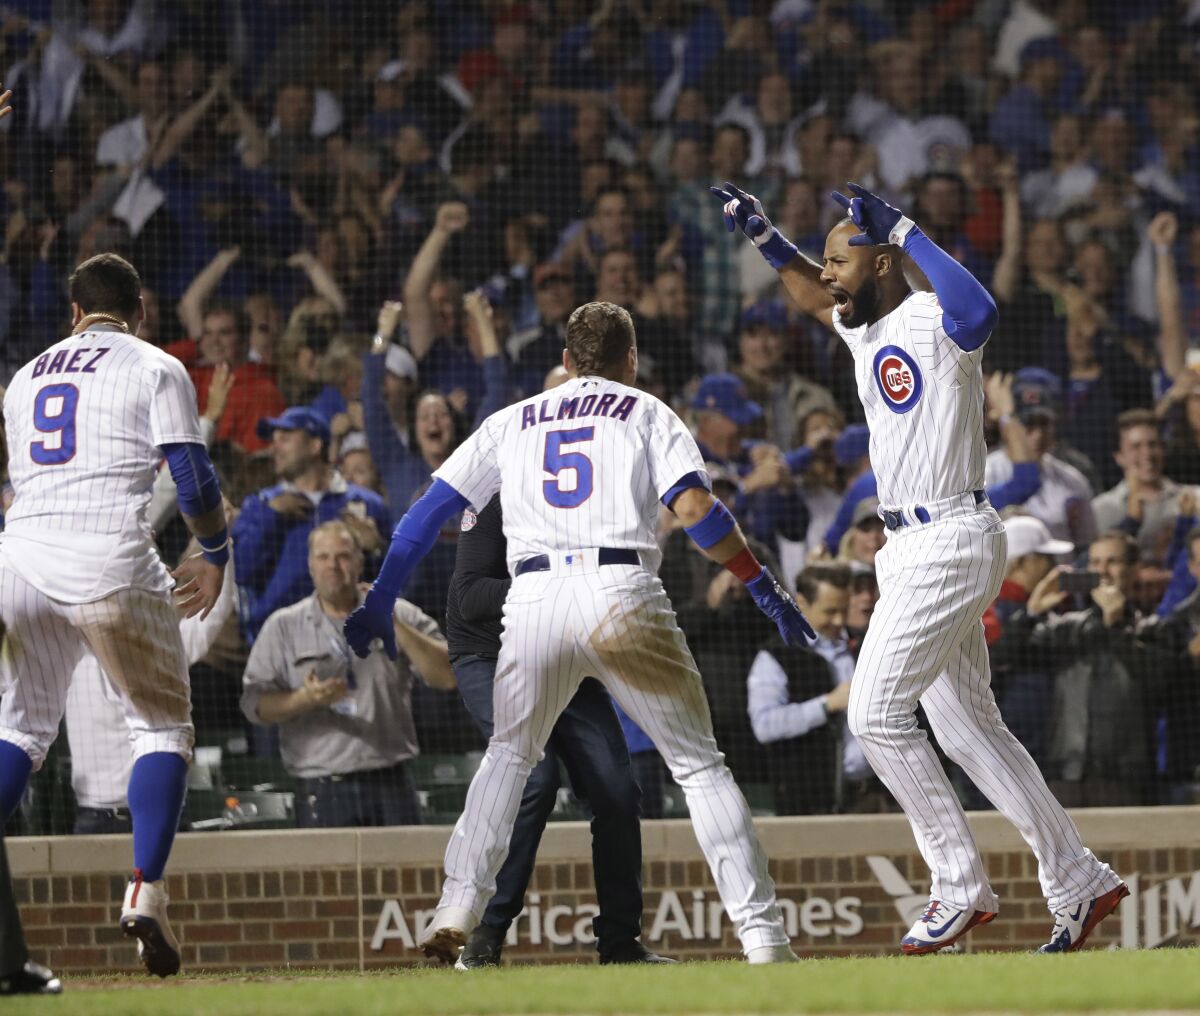 FILE - Chicago Cubs' Jason Heyward, right, celebrates his game-winning grand slam off Philadelphia Phillies relief pitcher Adam Morgan during the ninth inning of a baseball game Wednesday, June 6, 2018, in Chicago. Five-time Gold Glove outfielder Jason Heyward plans to play baseball next season, even if won’t be with the Cubs. Heyward hasn't been in a game since June 24 because of right knee inflammation. Cubs President of Baseball Operations Jed Hoyer said last month that Heyward won't be with Chicago next year. (AP Photo/Charles Rex Arbogast, File)